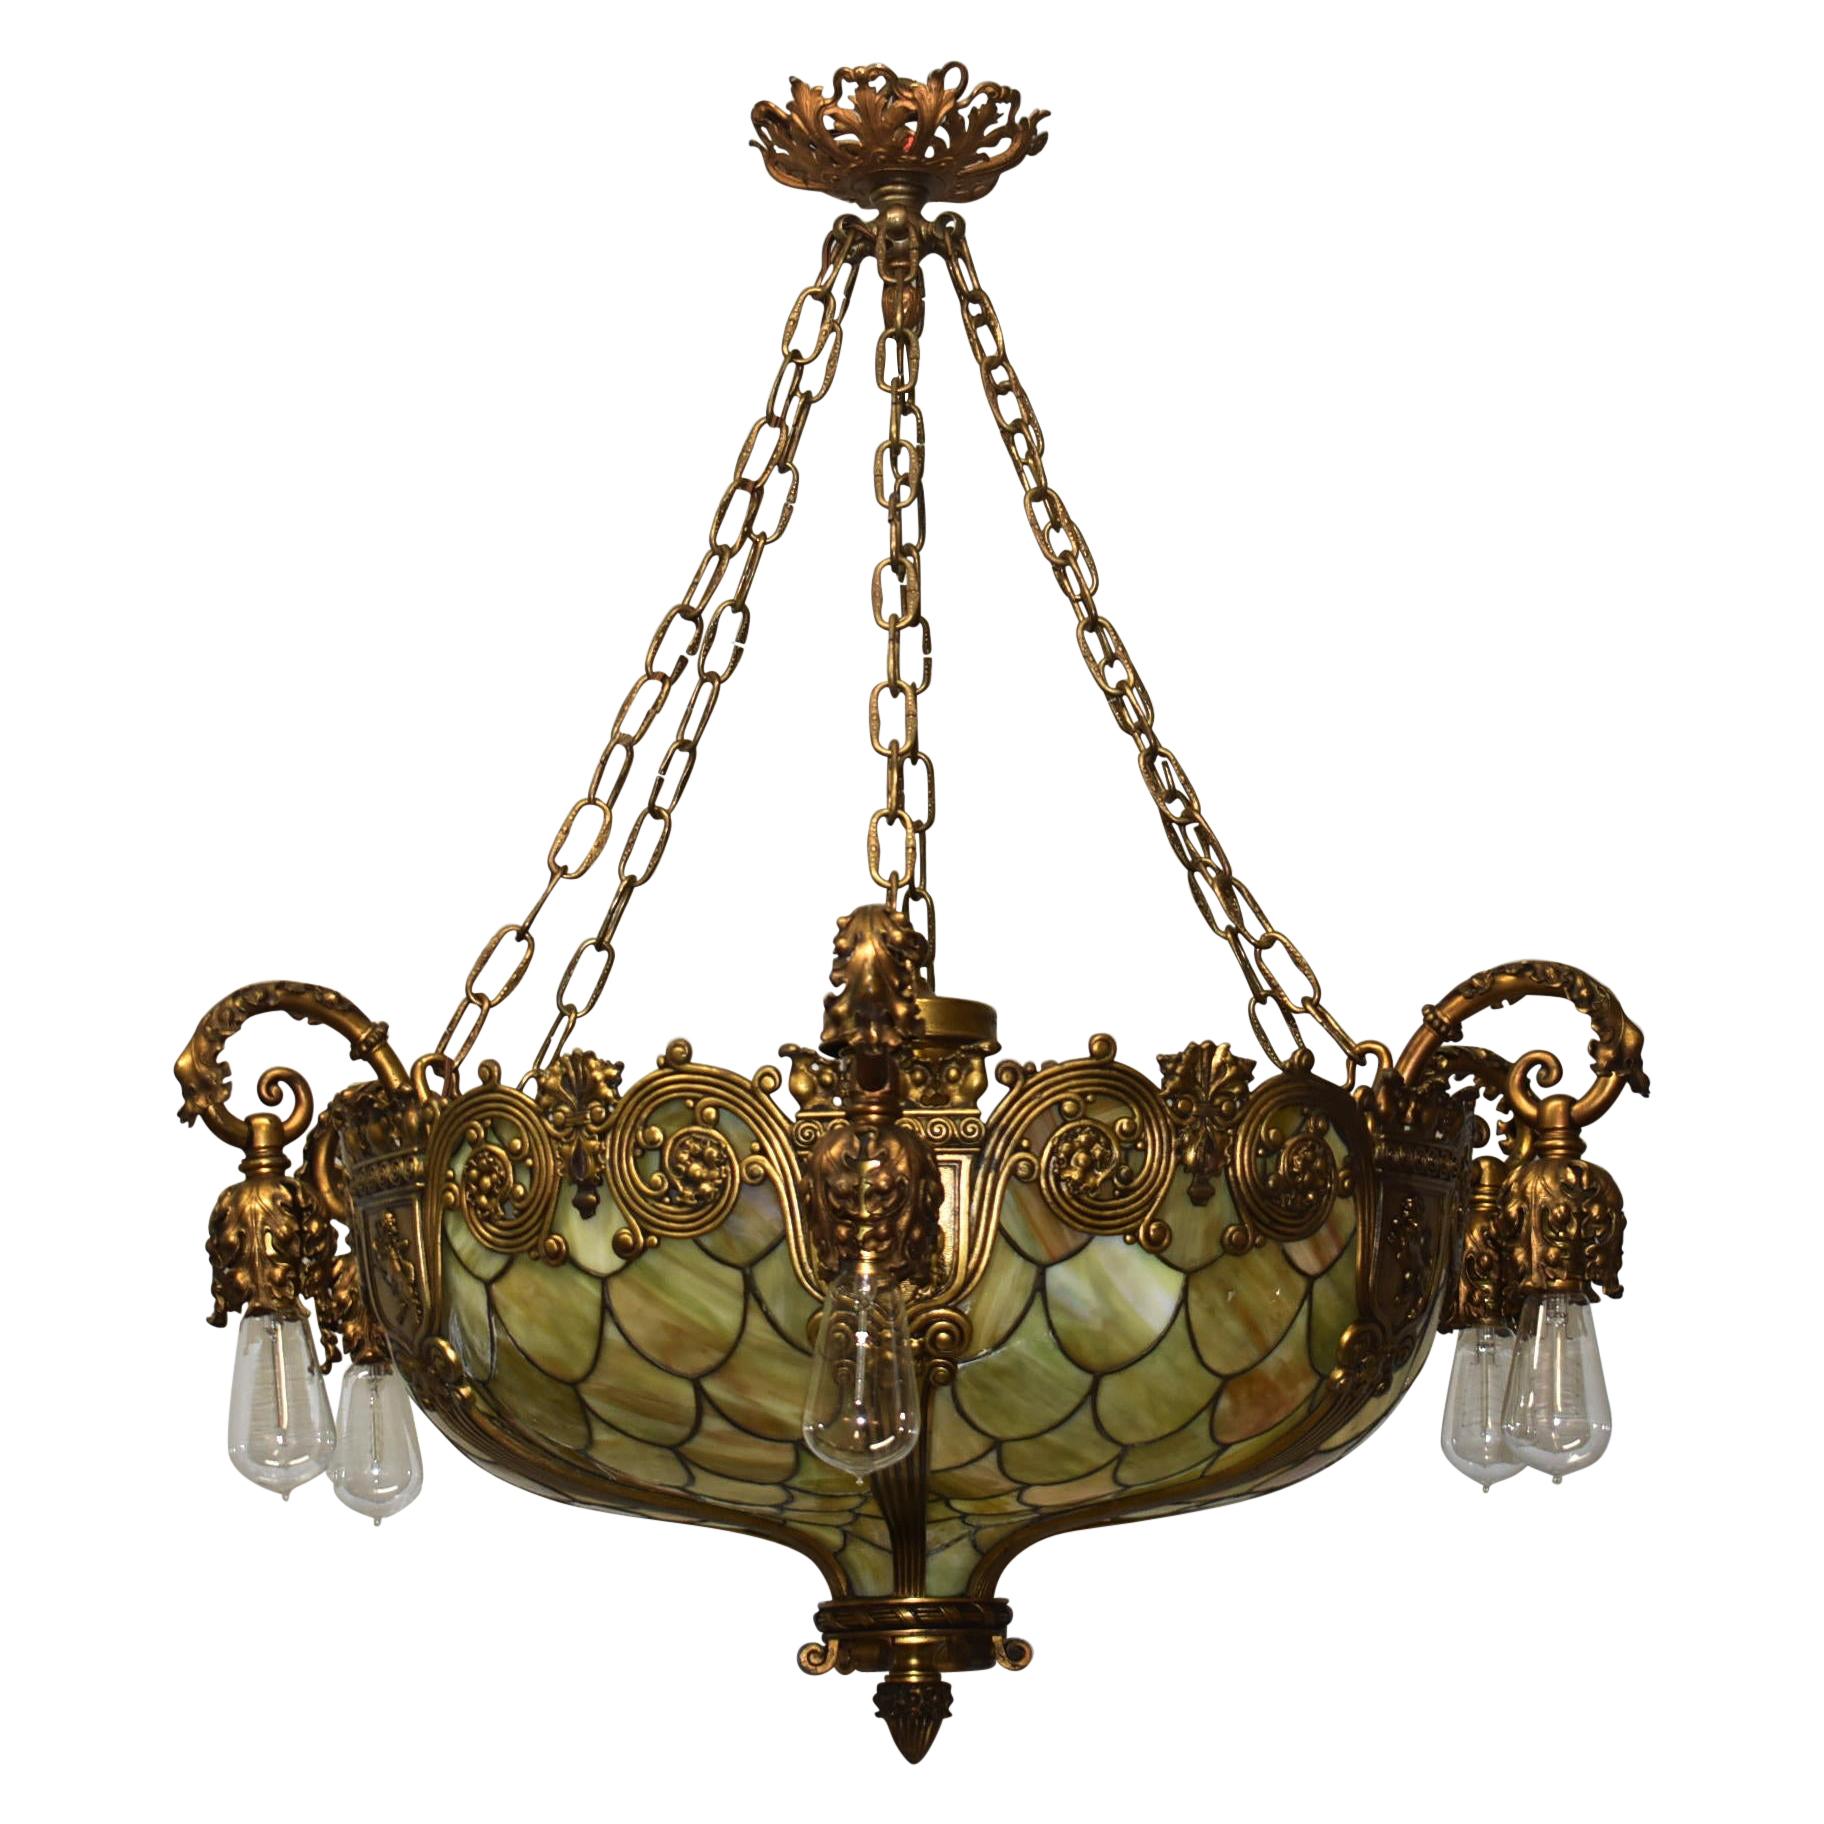 Bronze Gothic Revival Fish Scale Leaded Glass Chandelier Att. Duffner & Kimberly